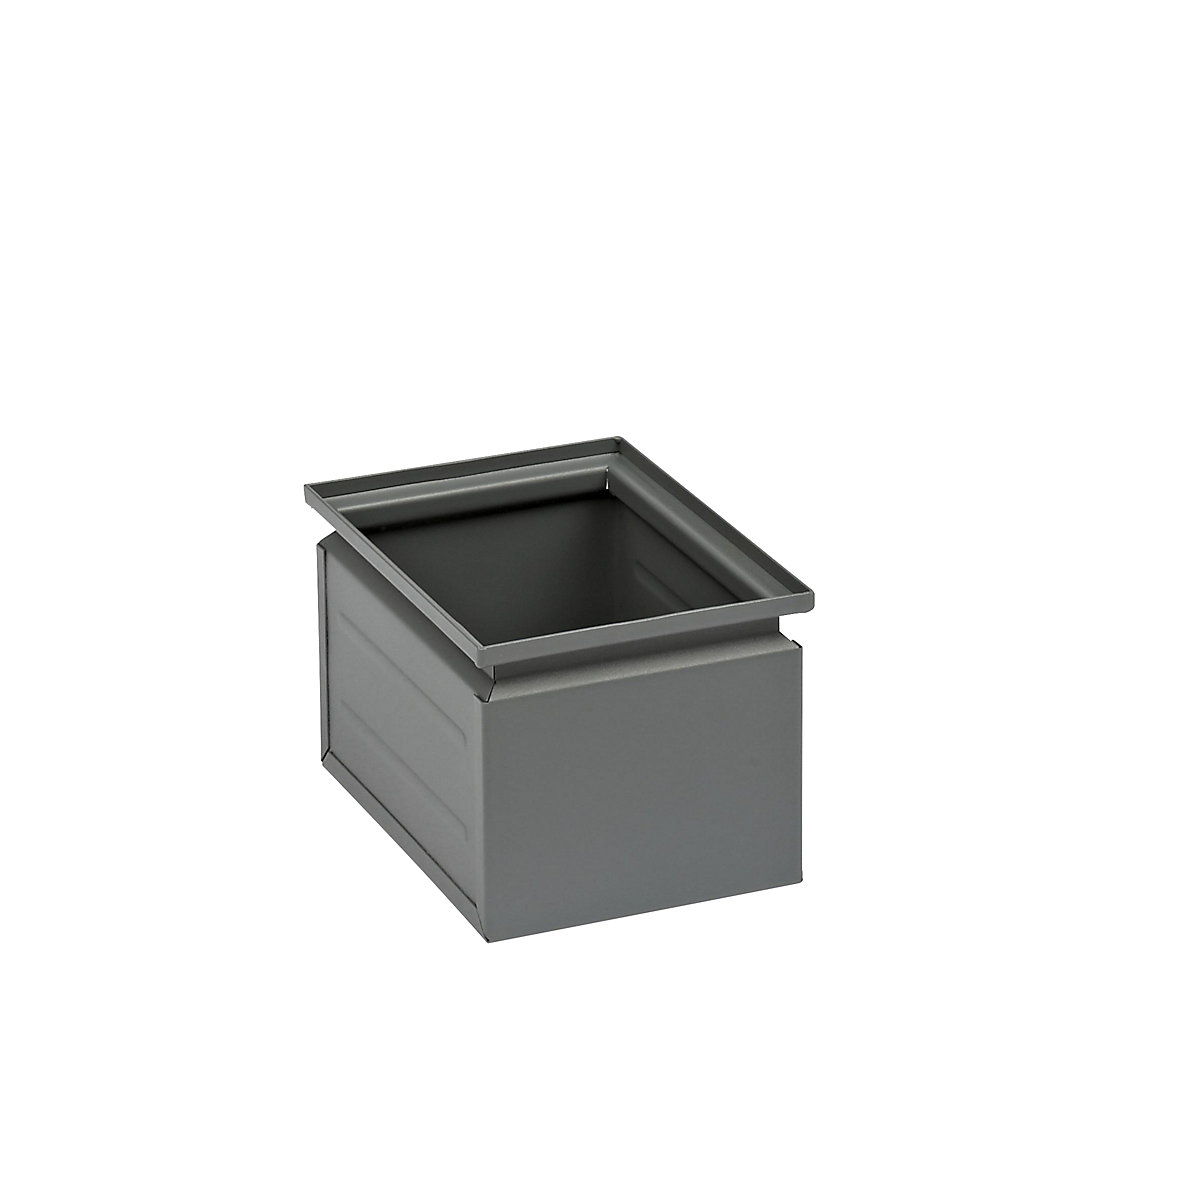 Stacking container made of sheet steel, capacity approx. 3.6 l, basalt grey RAL 7012